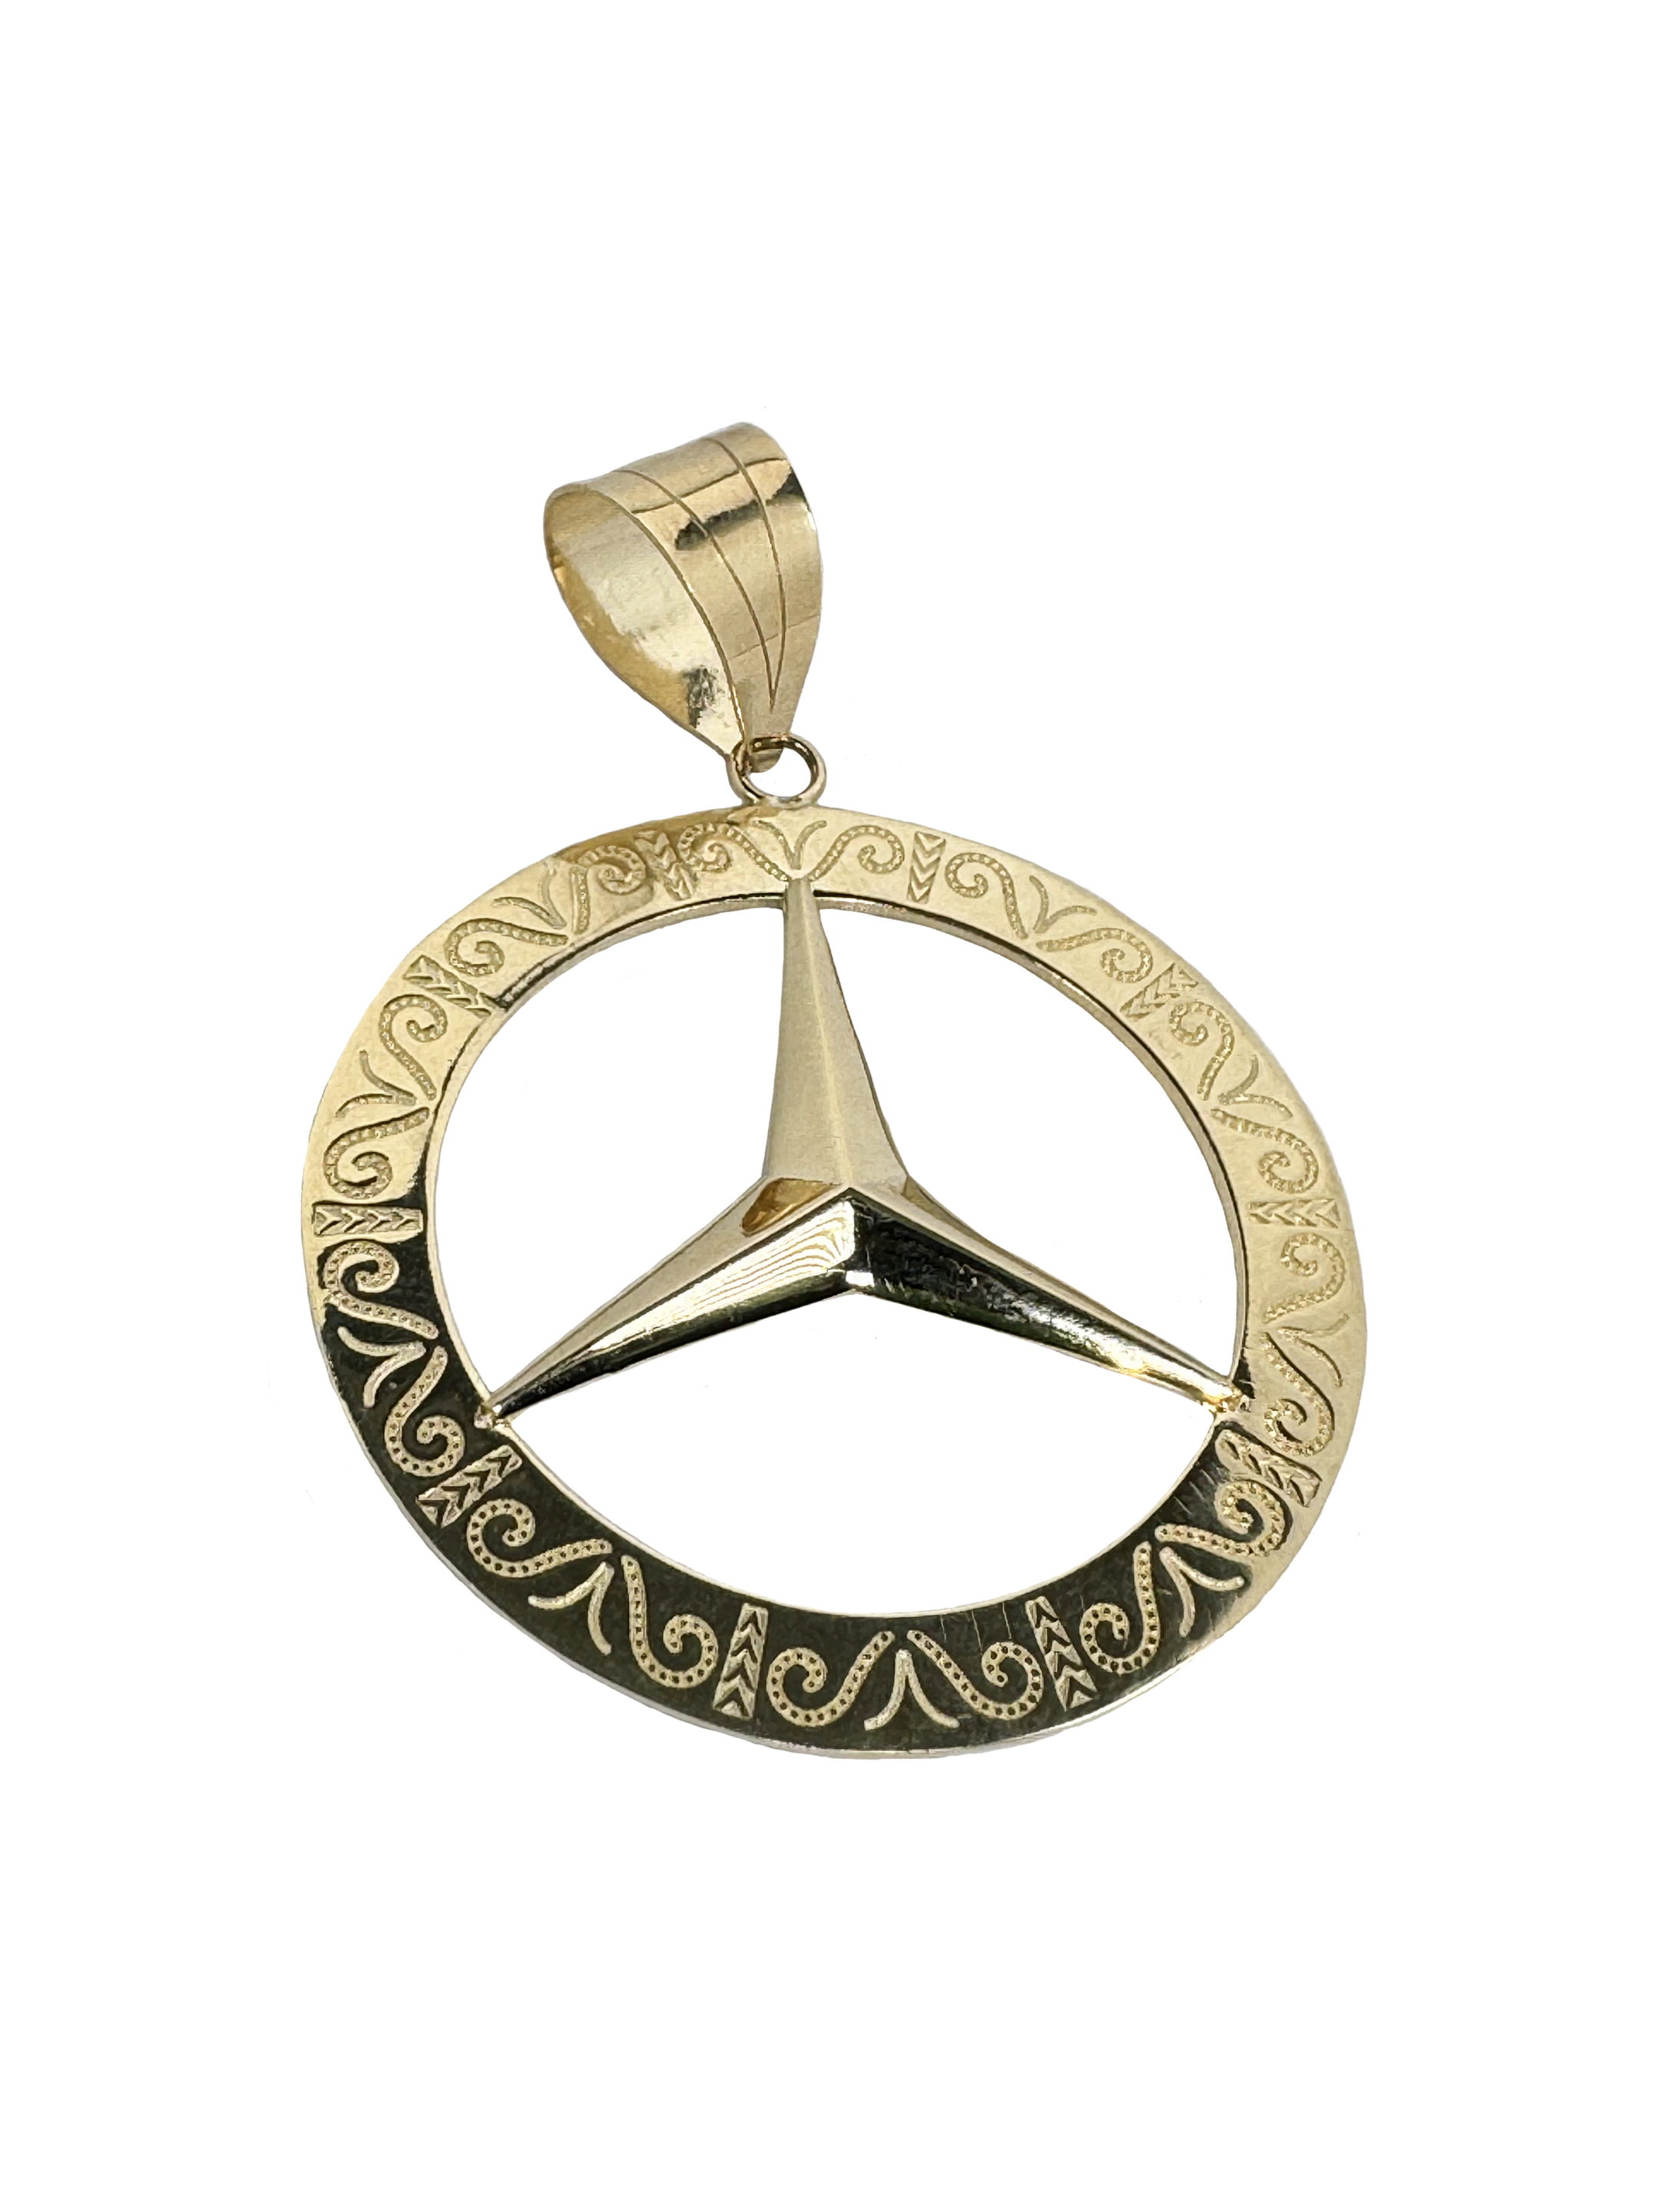 Golden luxury pendant with logo and engraving